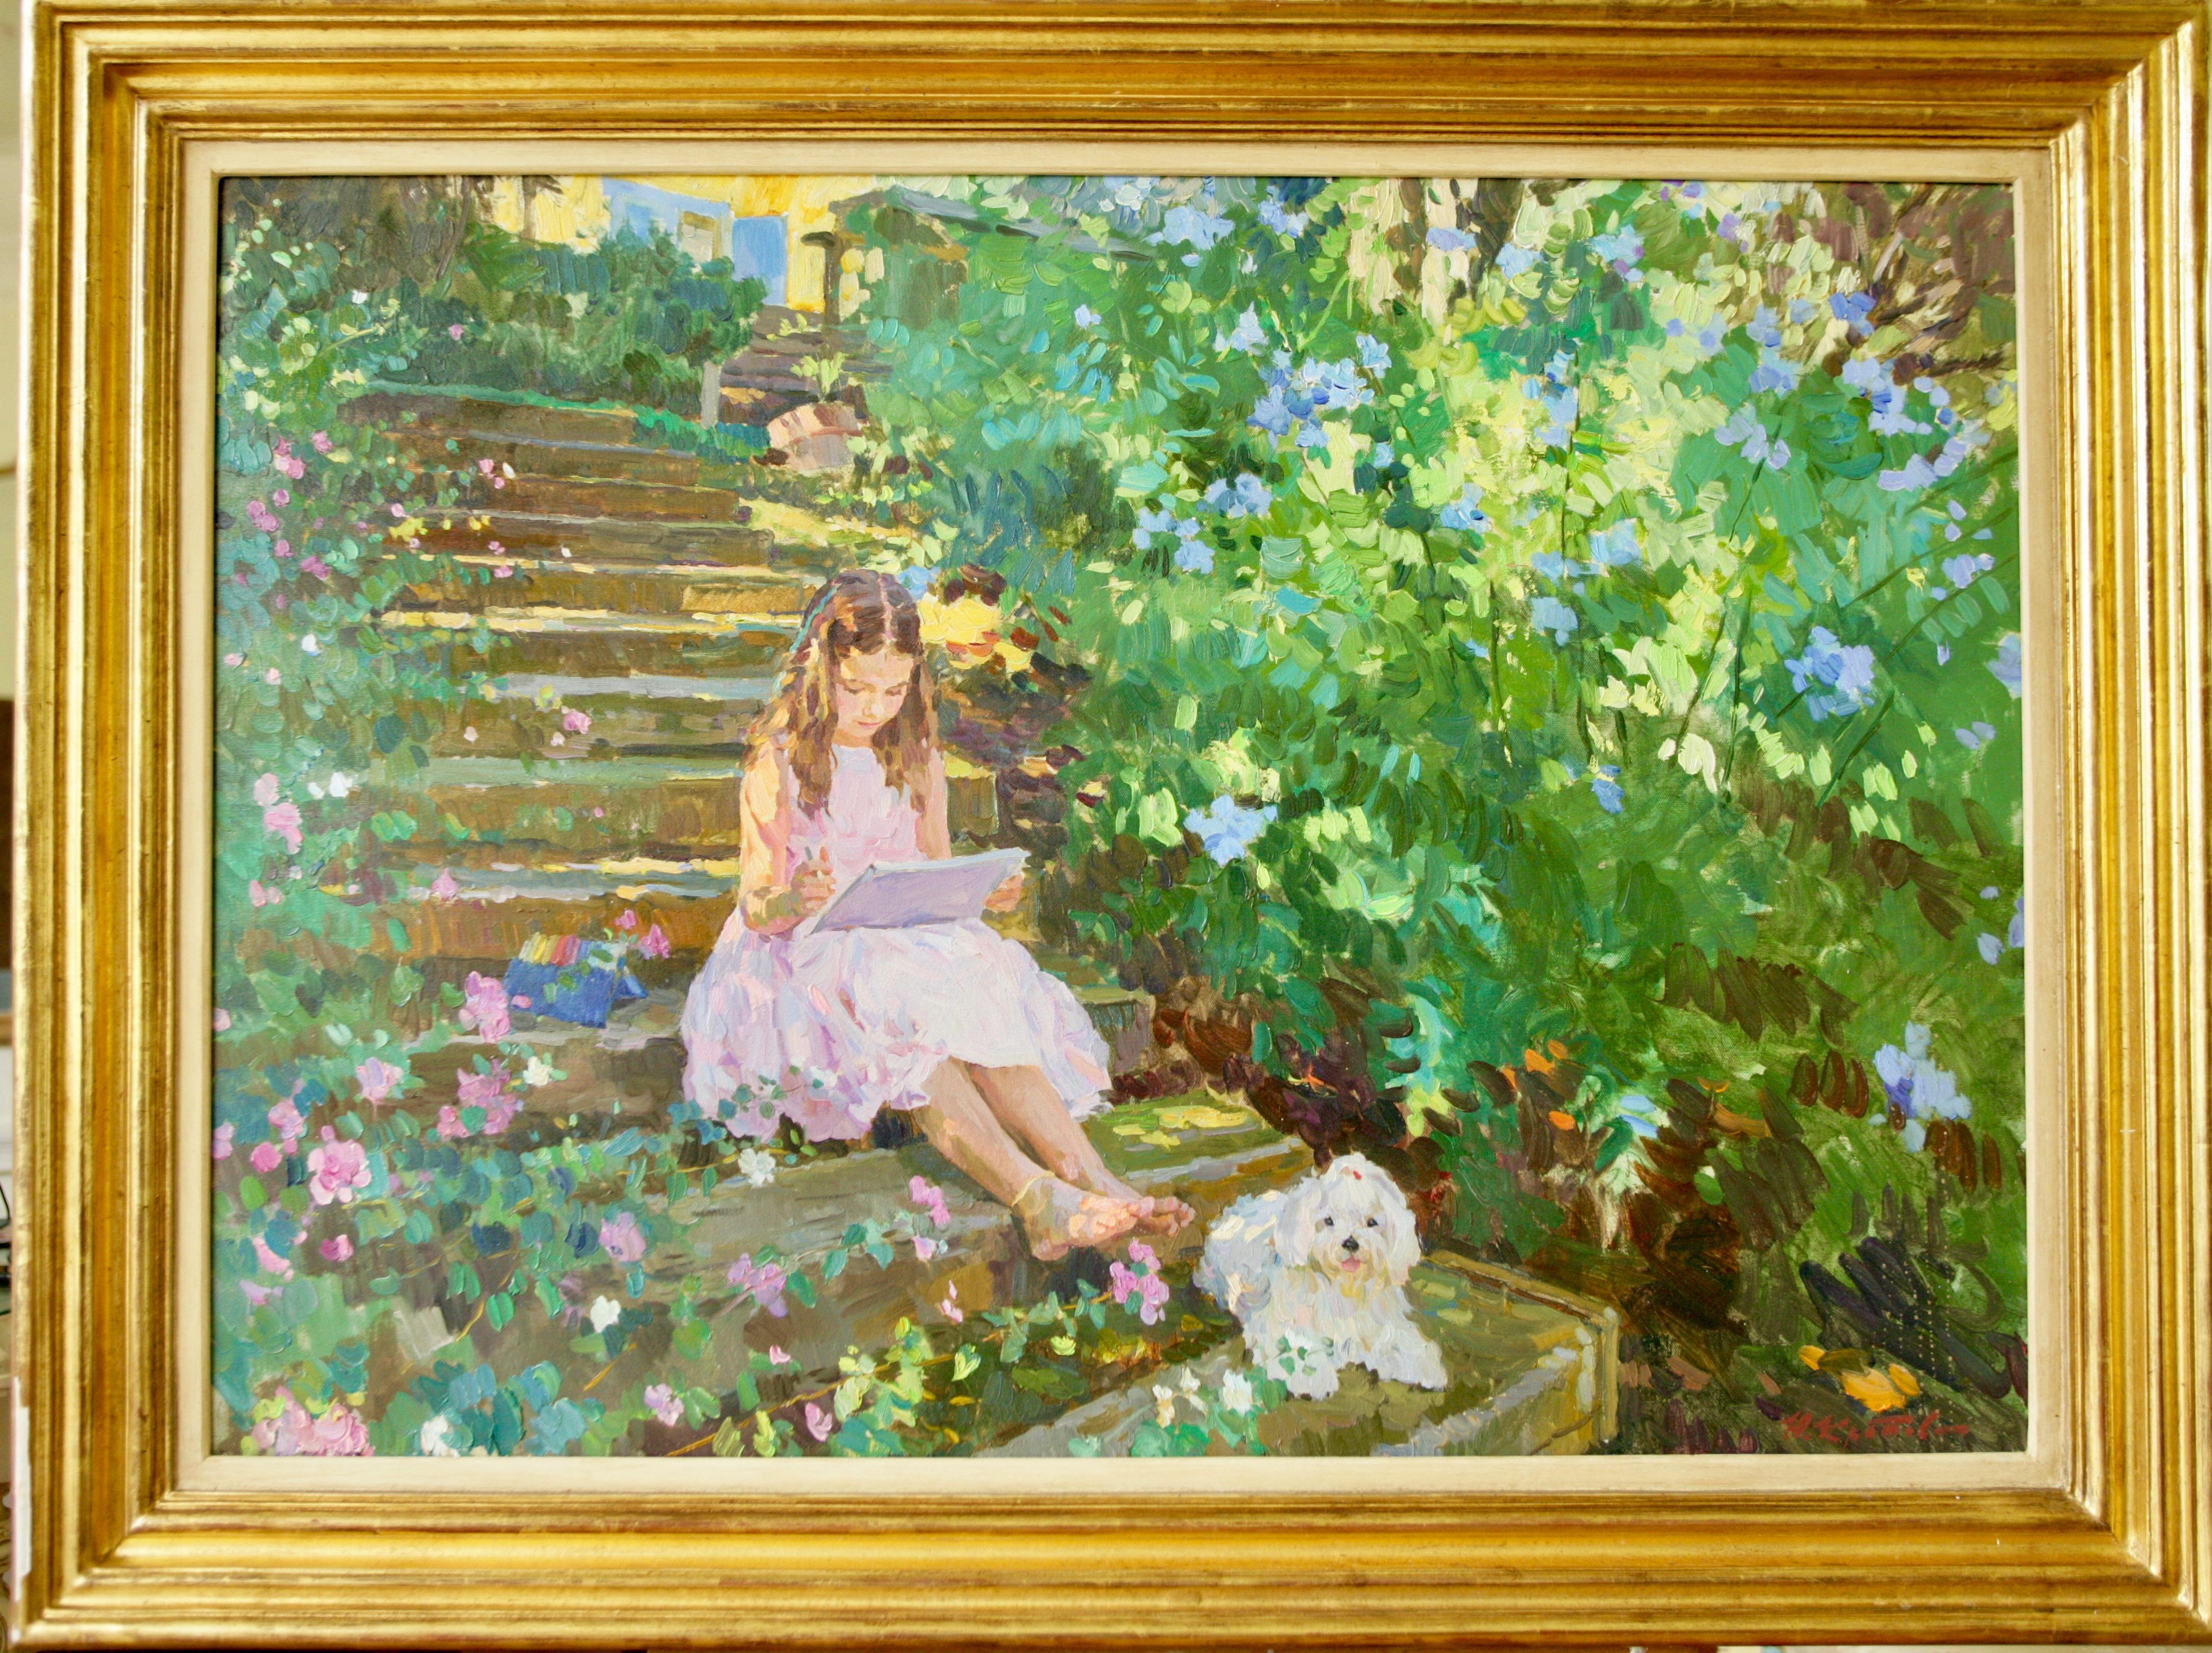 The name of Yuri Krotov [Юрий Кротов] as an artist became known to the art-lovers in Europe in 1992 during the sale of Russian paintings at the auction room Drouot in Paris, Thanks to perfection of an academic technique of painting, bright colouring